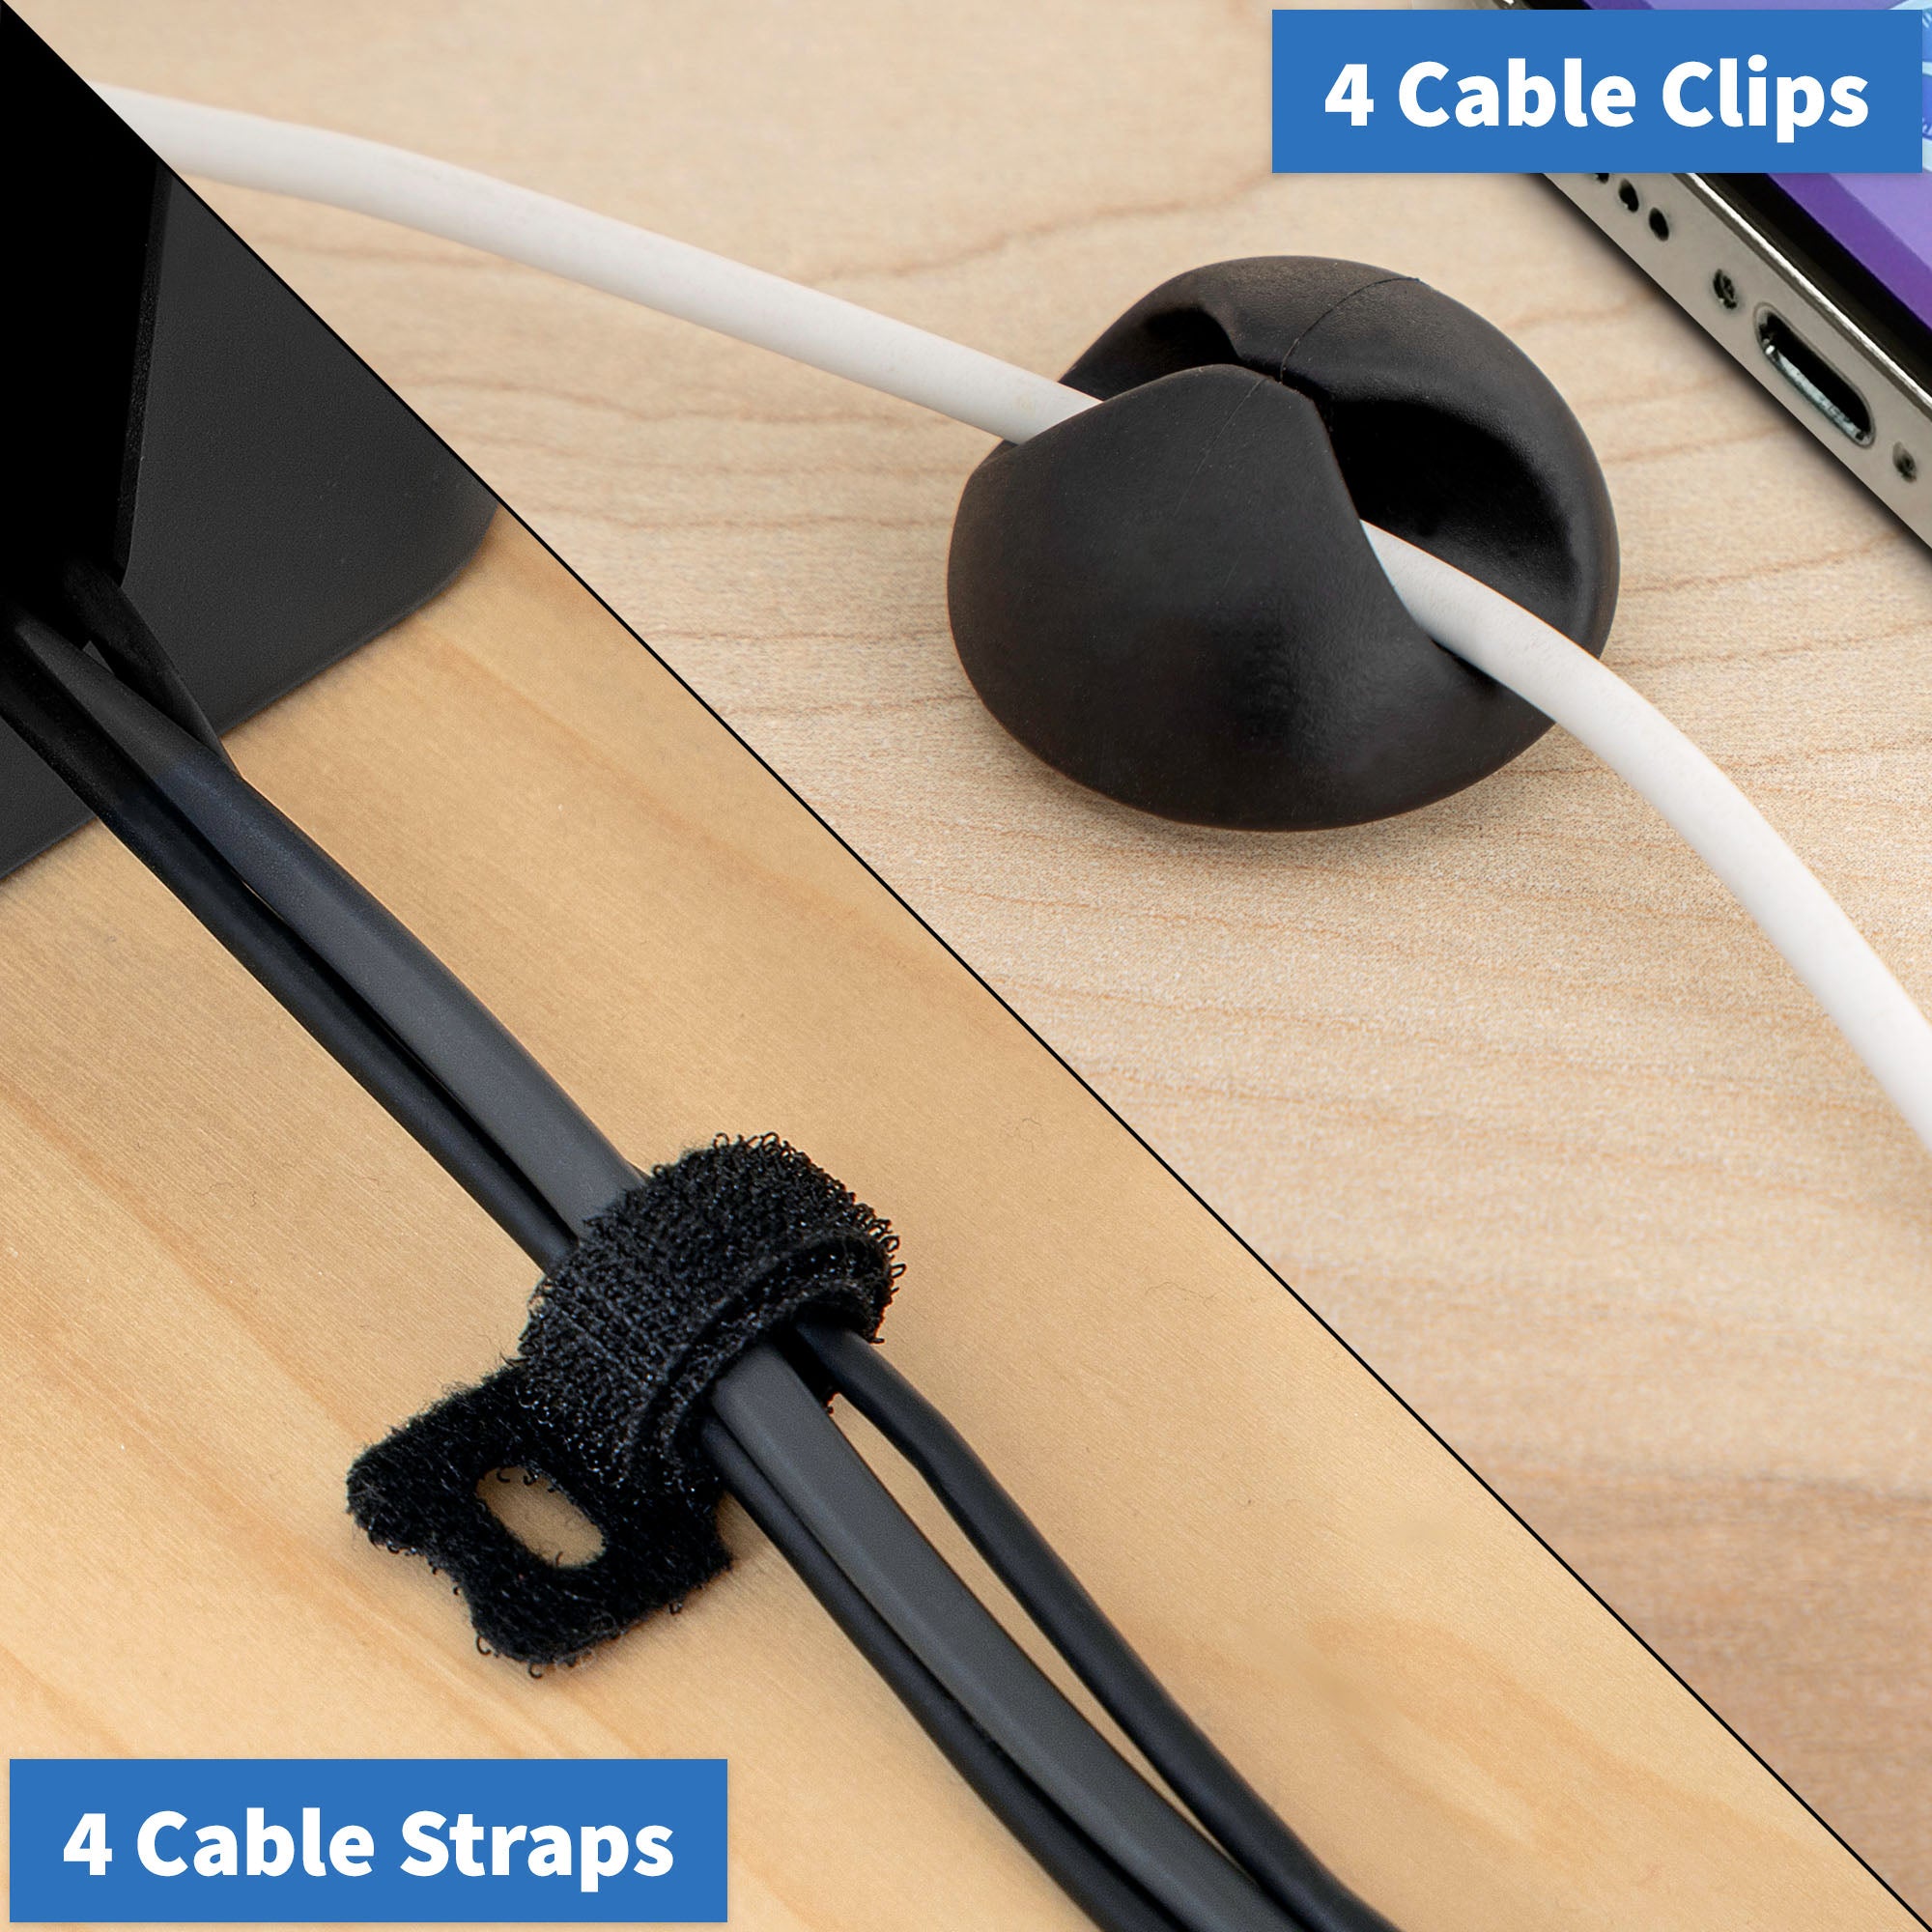 Cable Management Box - Hide Cords Home Organizer Tool, Power Strip